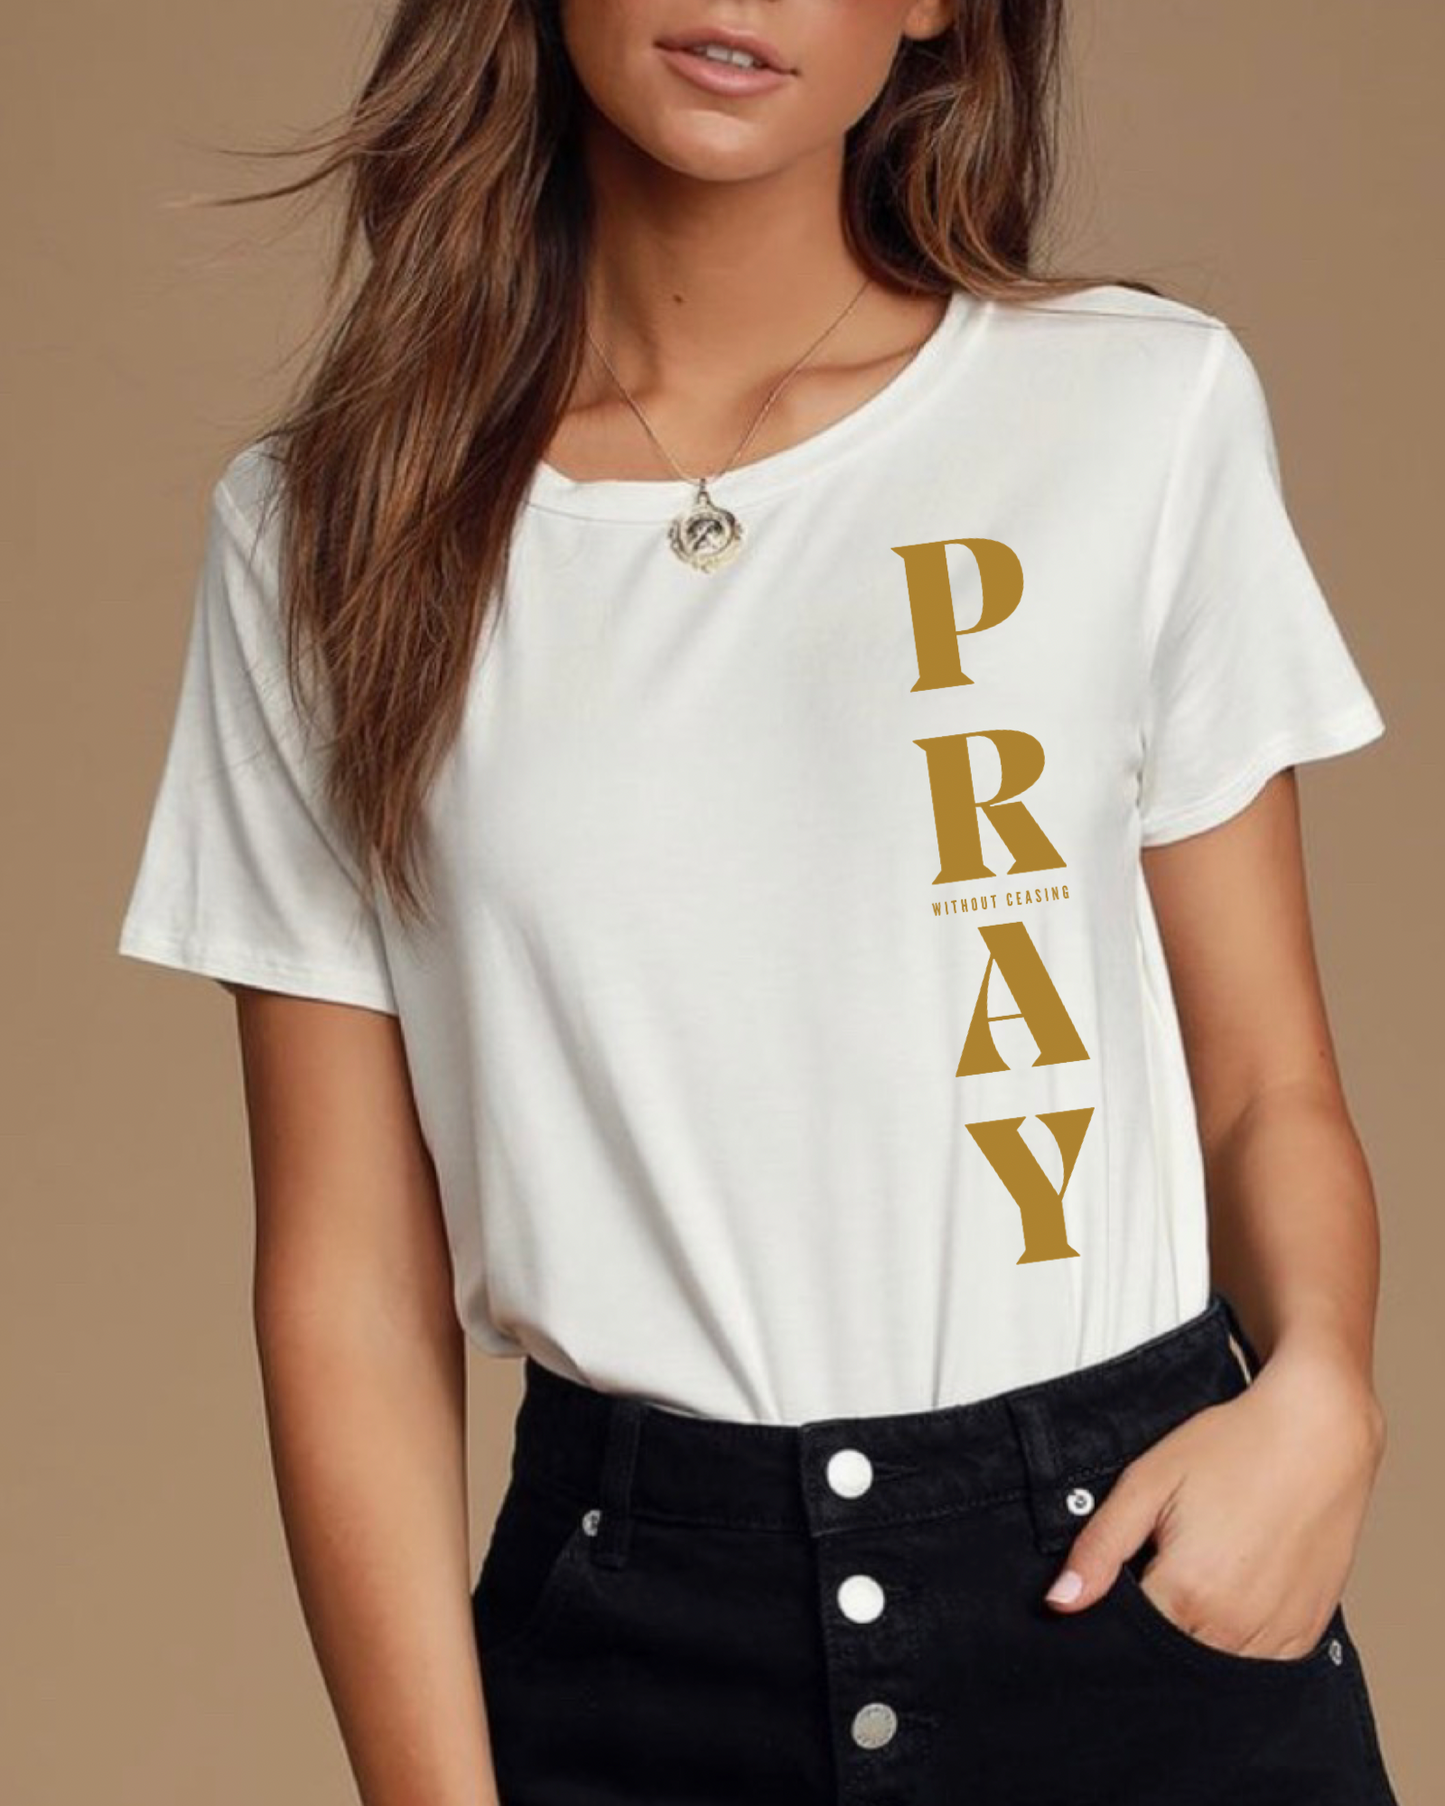 Pray Without Ceasing - Christian T-shirt